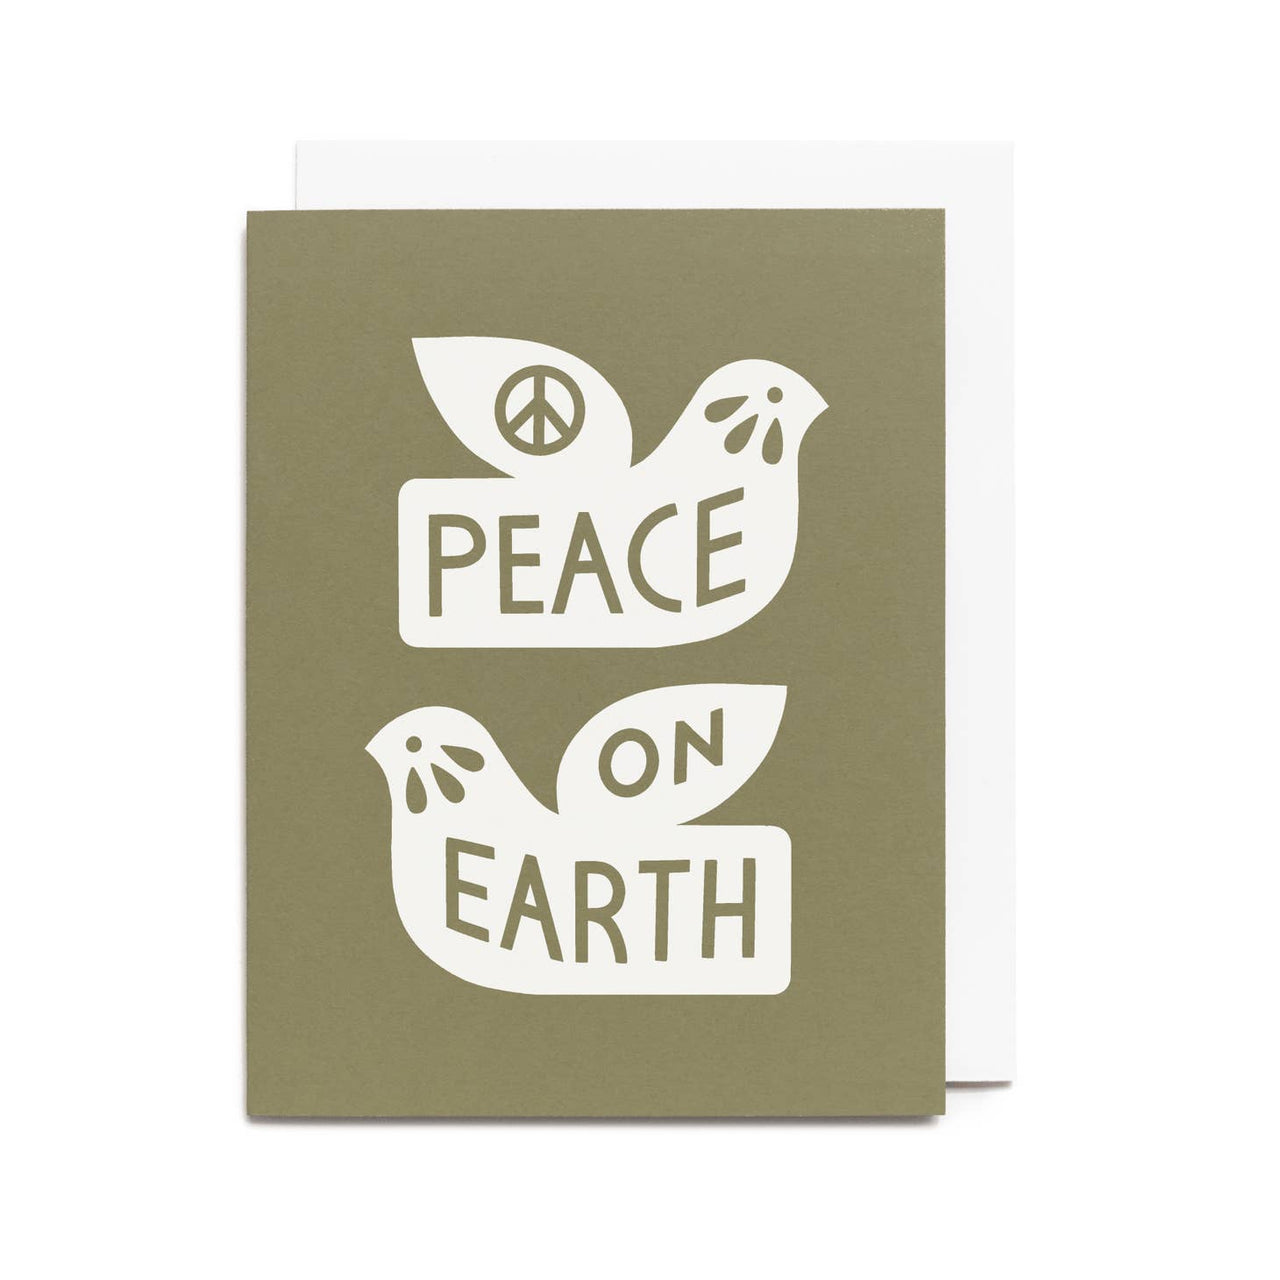 Worthwhile - Peace on Earth Greeting Card